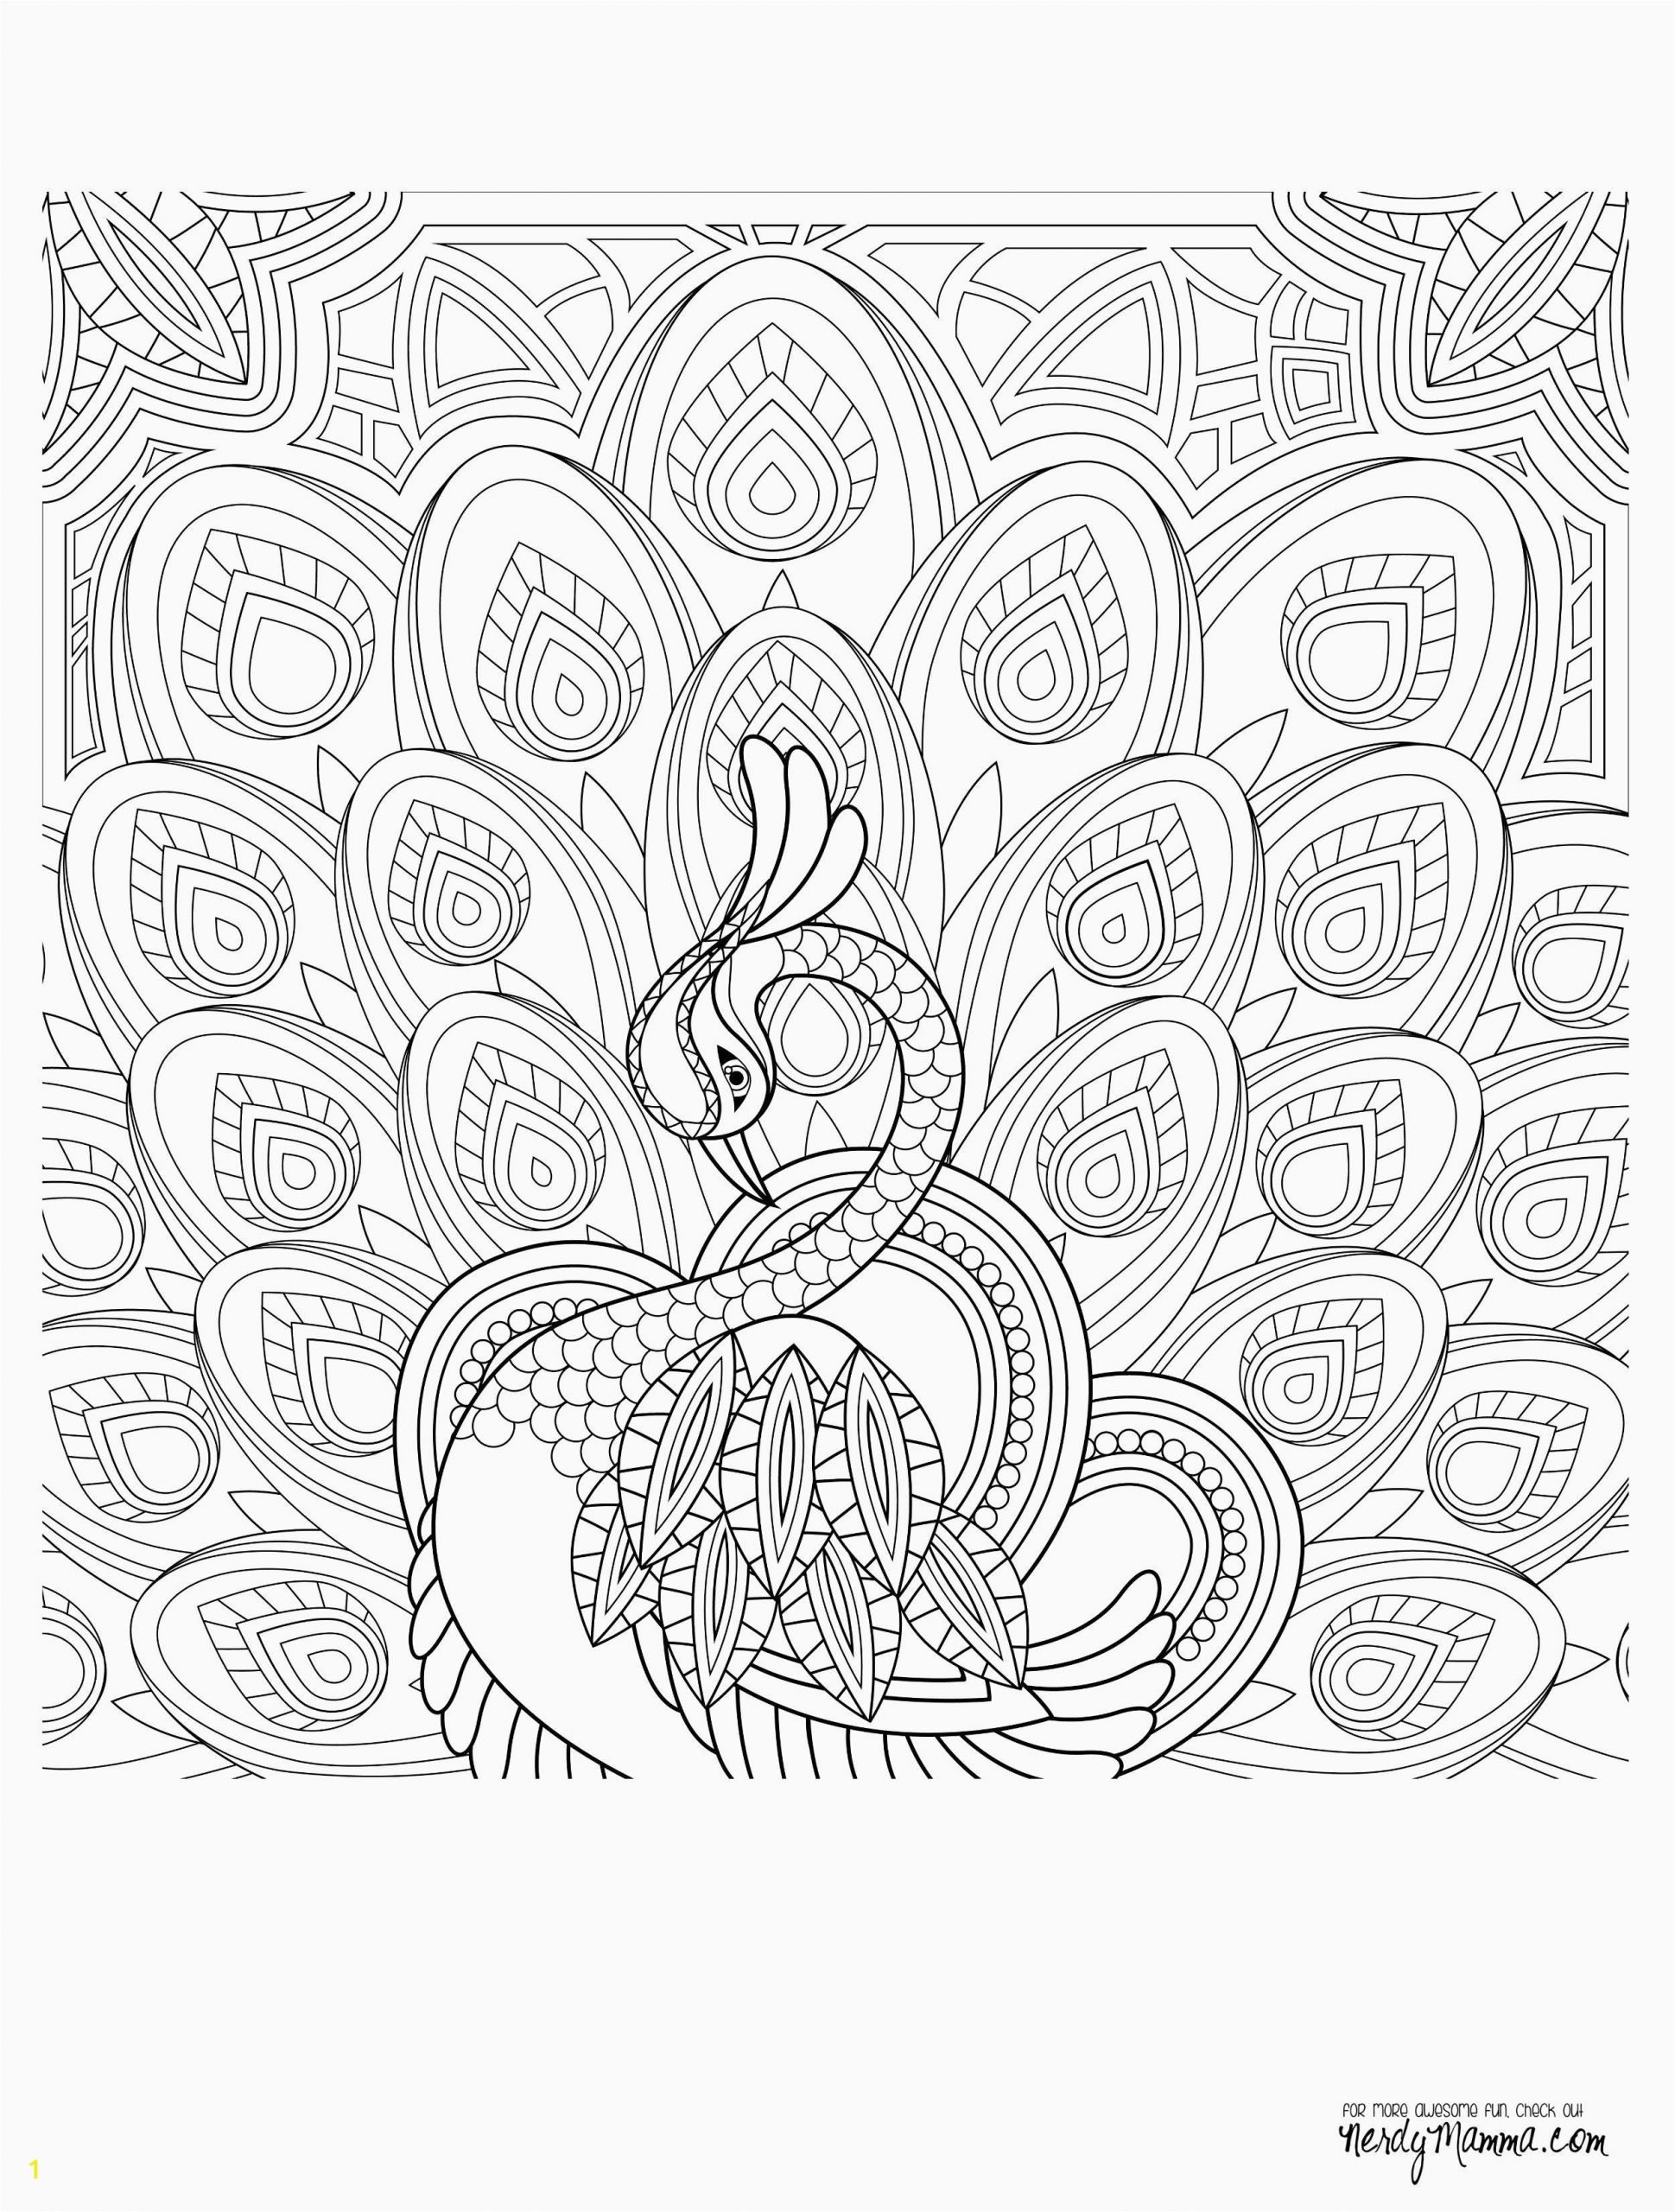 Adult Coloring Pages Printable Pin On Adult 5